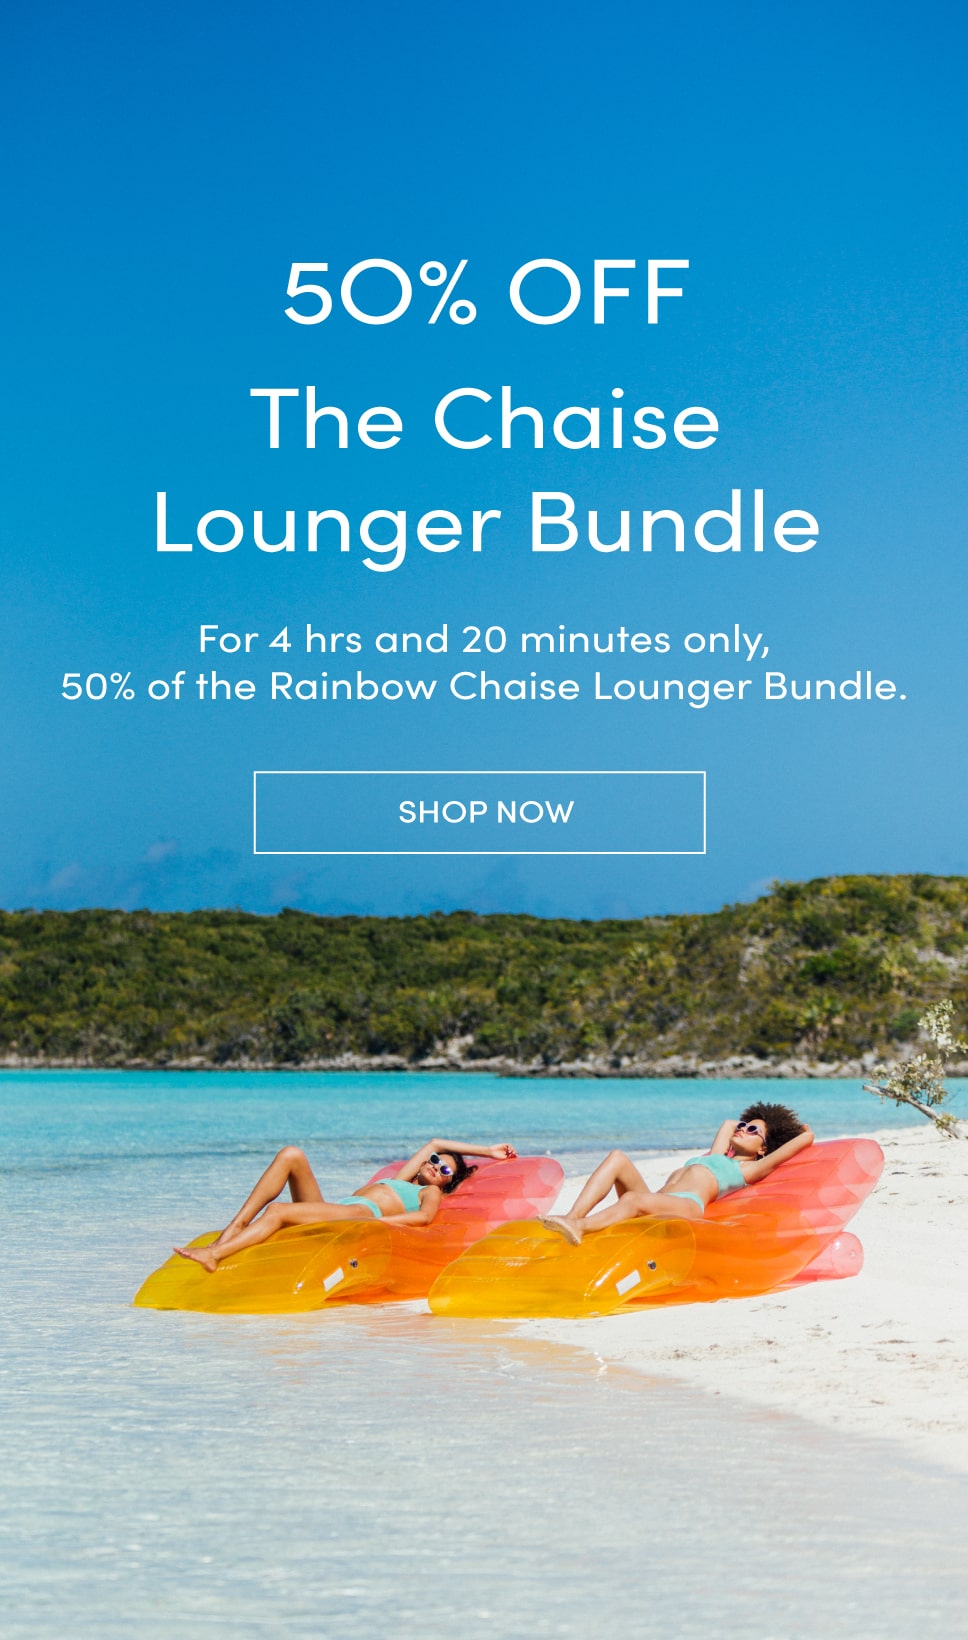 50% off the Chaise lounger bundle. For 4 hours and 20 minutes only, 50% off the bundle